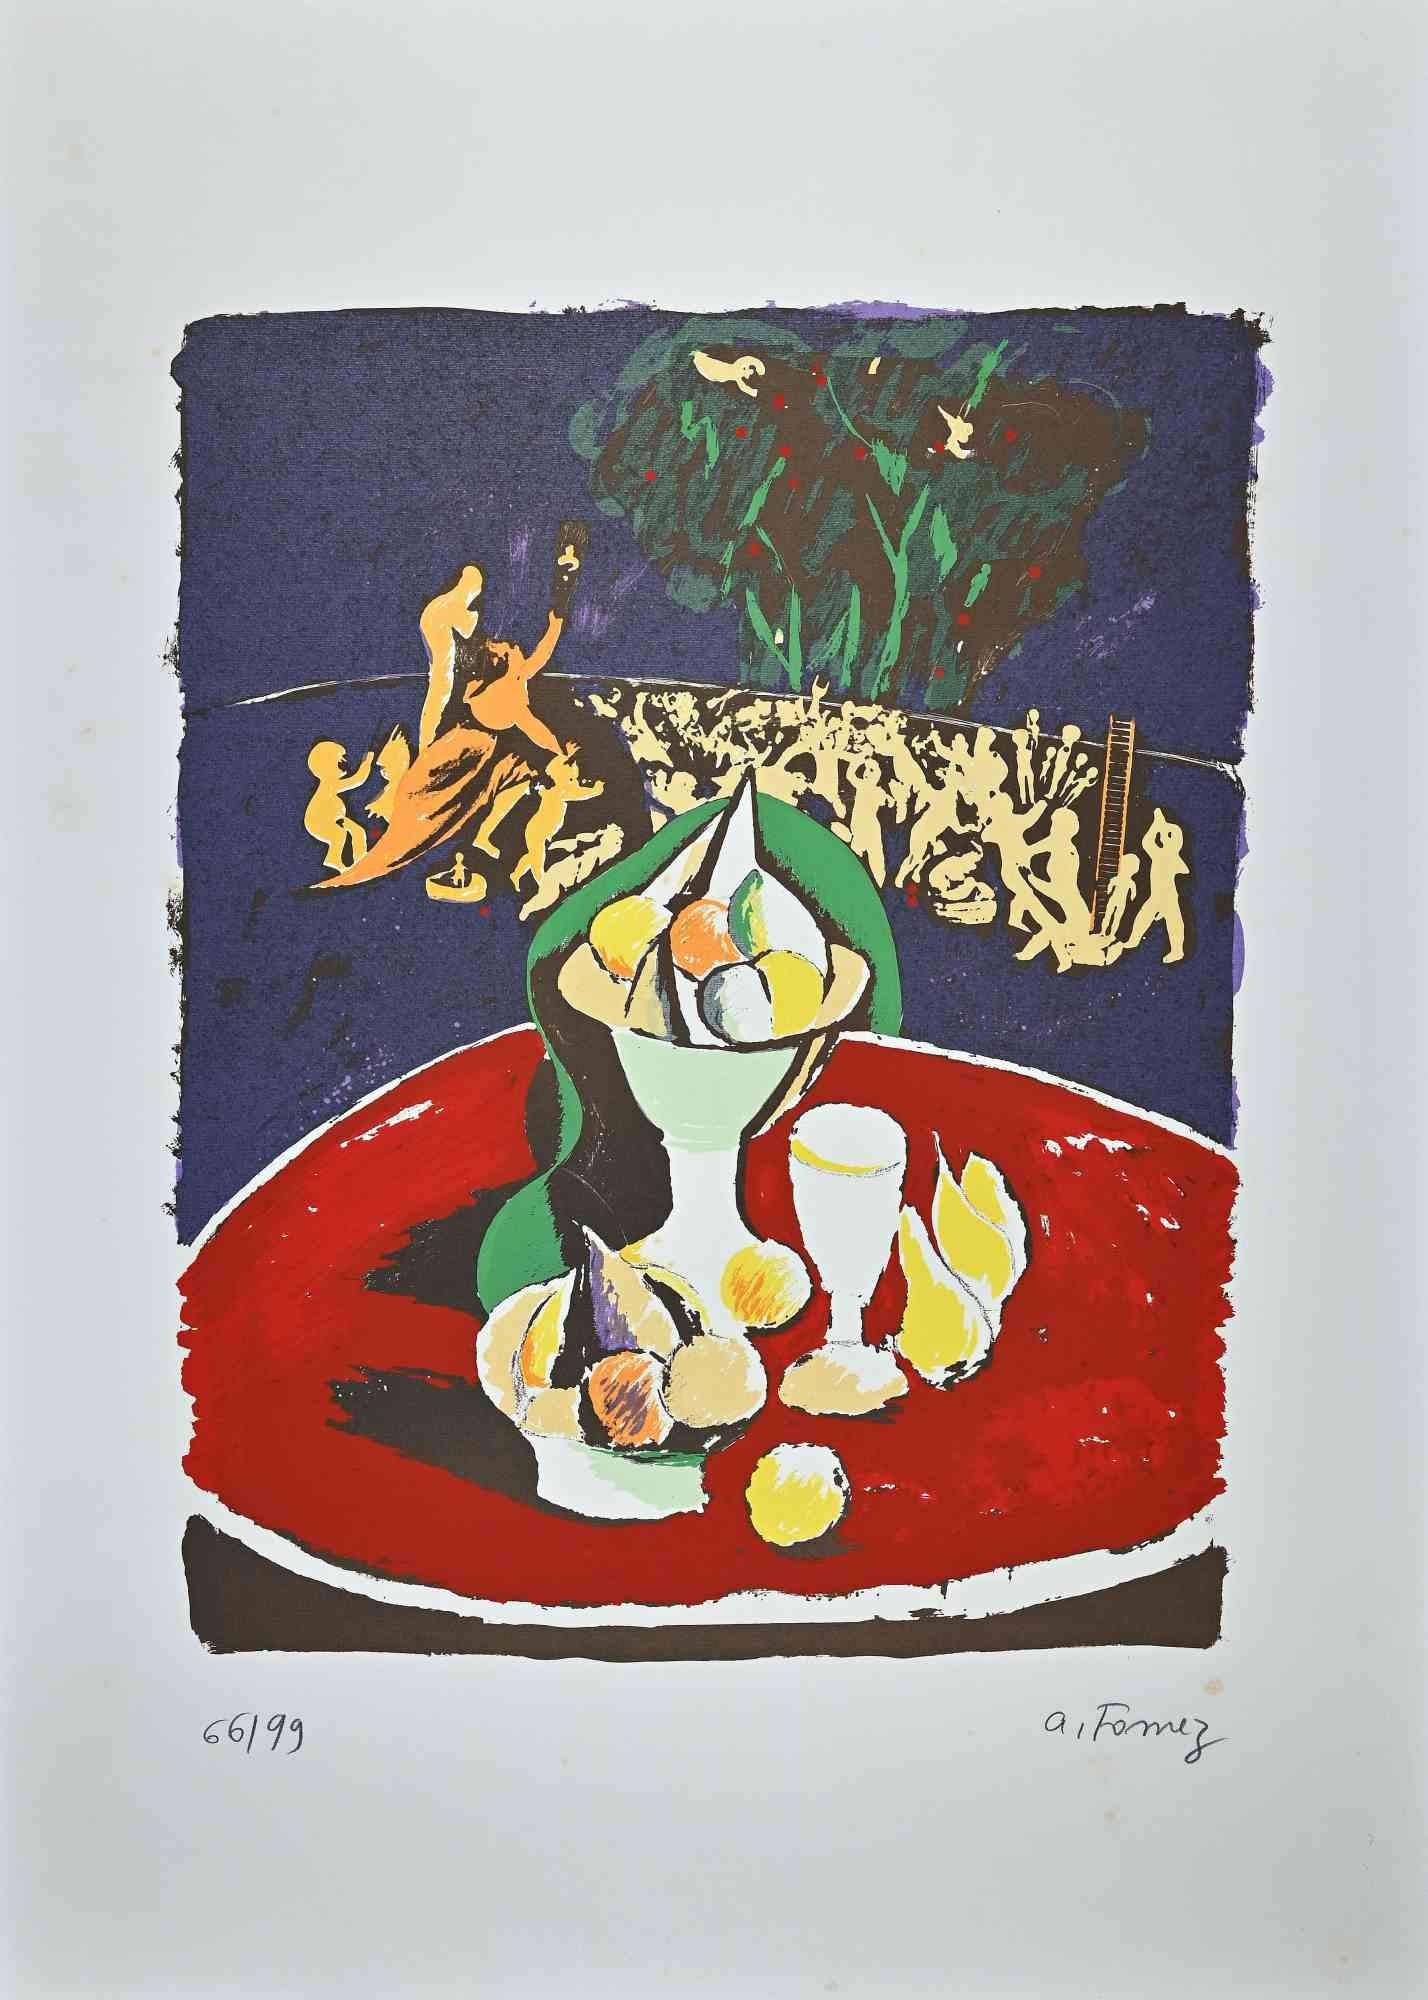 Still Life is an original colored lithograph realized by Antonio Fomez between 1950 and 1974 .

Hand-signed in pencil on the lower right. Numbered, edition of 99 prints, (handwritten in pencil on the lower left).

Good conditions.

With the